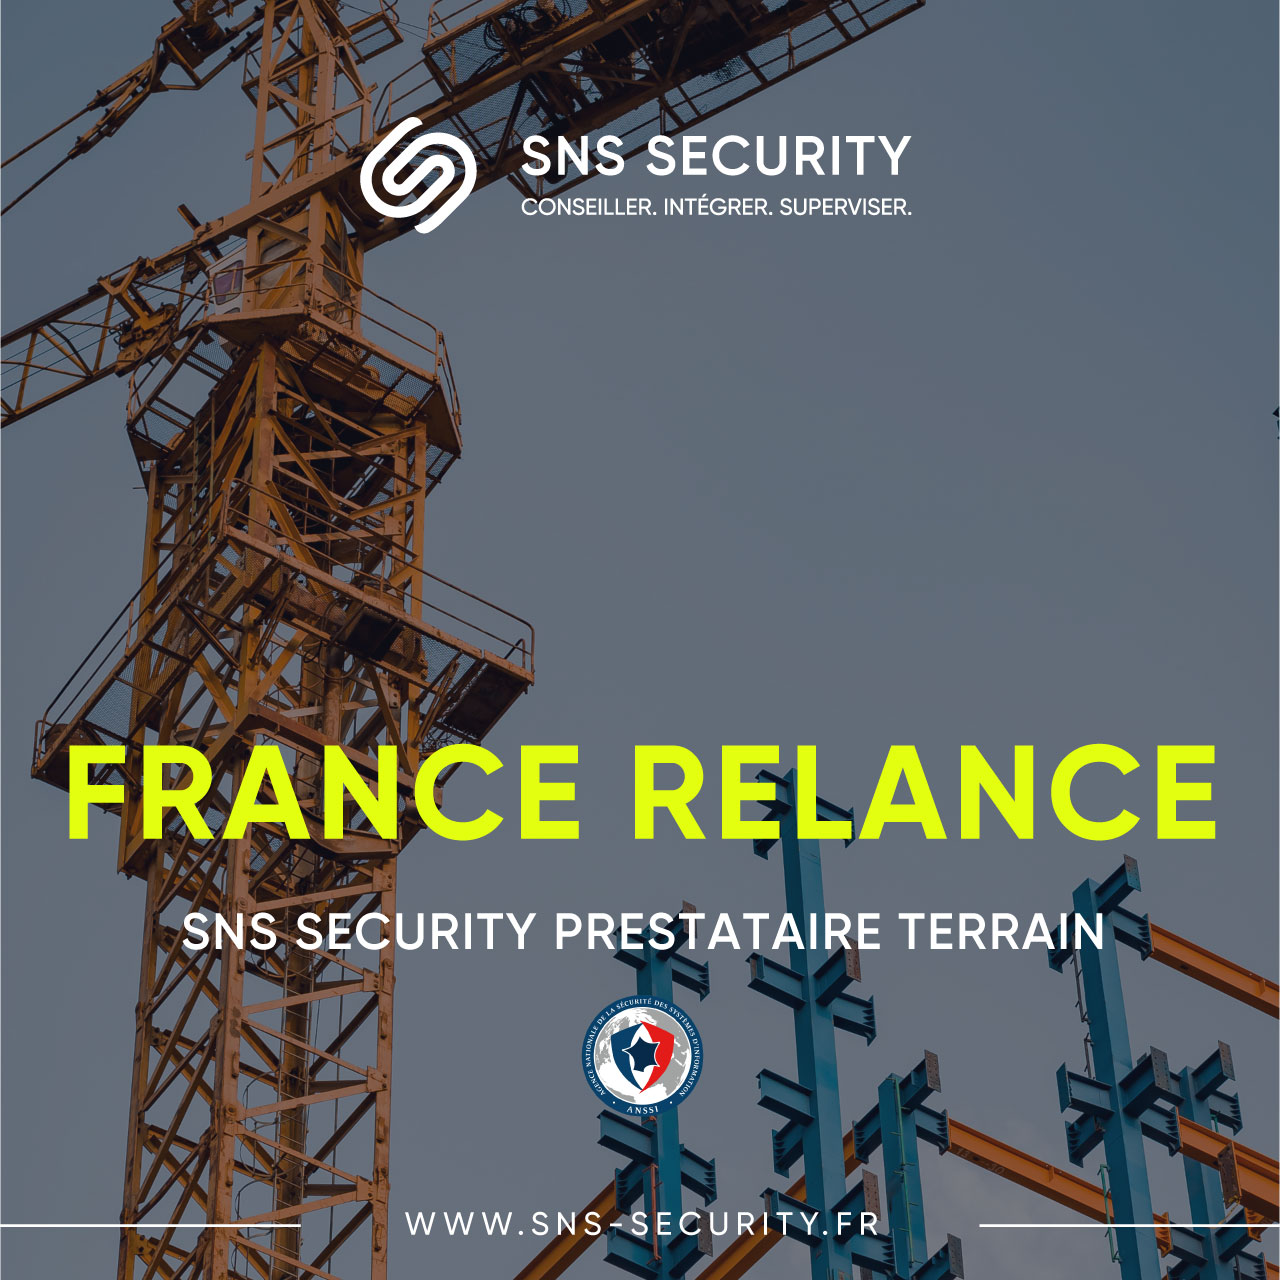 sns security prestataire terrain france relance cybersecurite